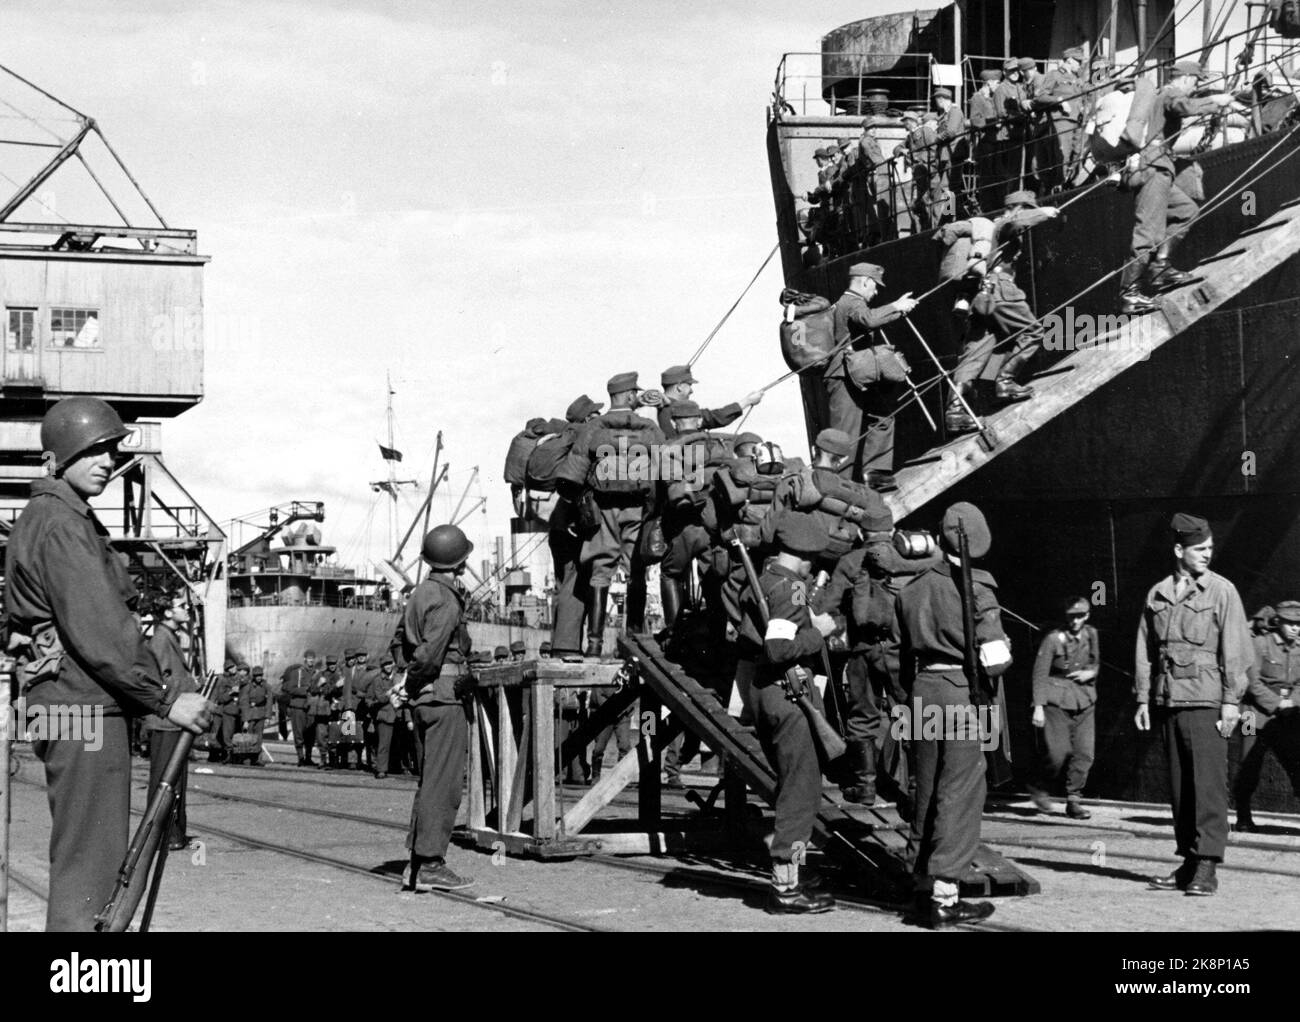 Drammen 1945. The liberation. The German soldiers and officers finally leave Norway. Here a group of 2,000 men on board the gangway in a German ship in Drammen, and many pretend to be happy to go home. WW2. Photo: NTB / NTB Stock Photo